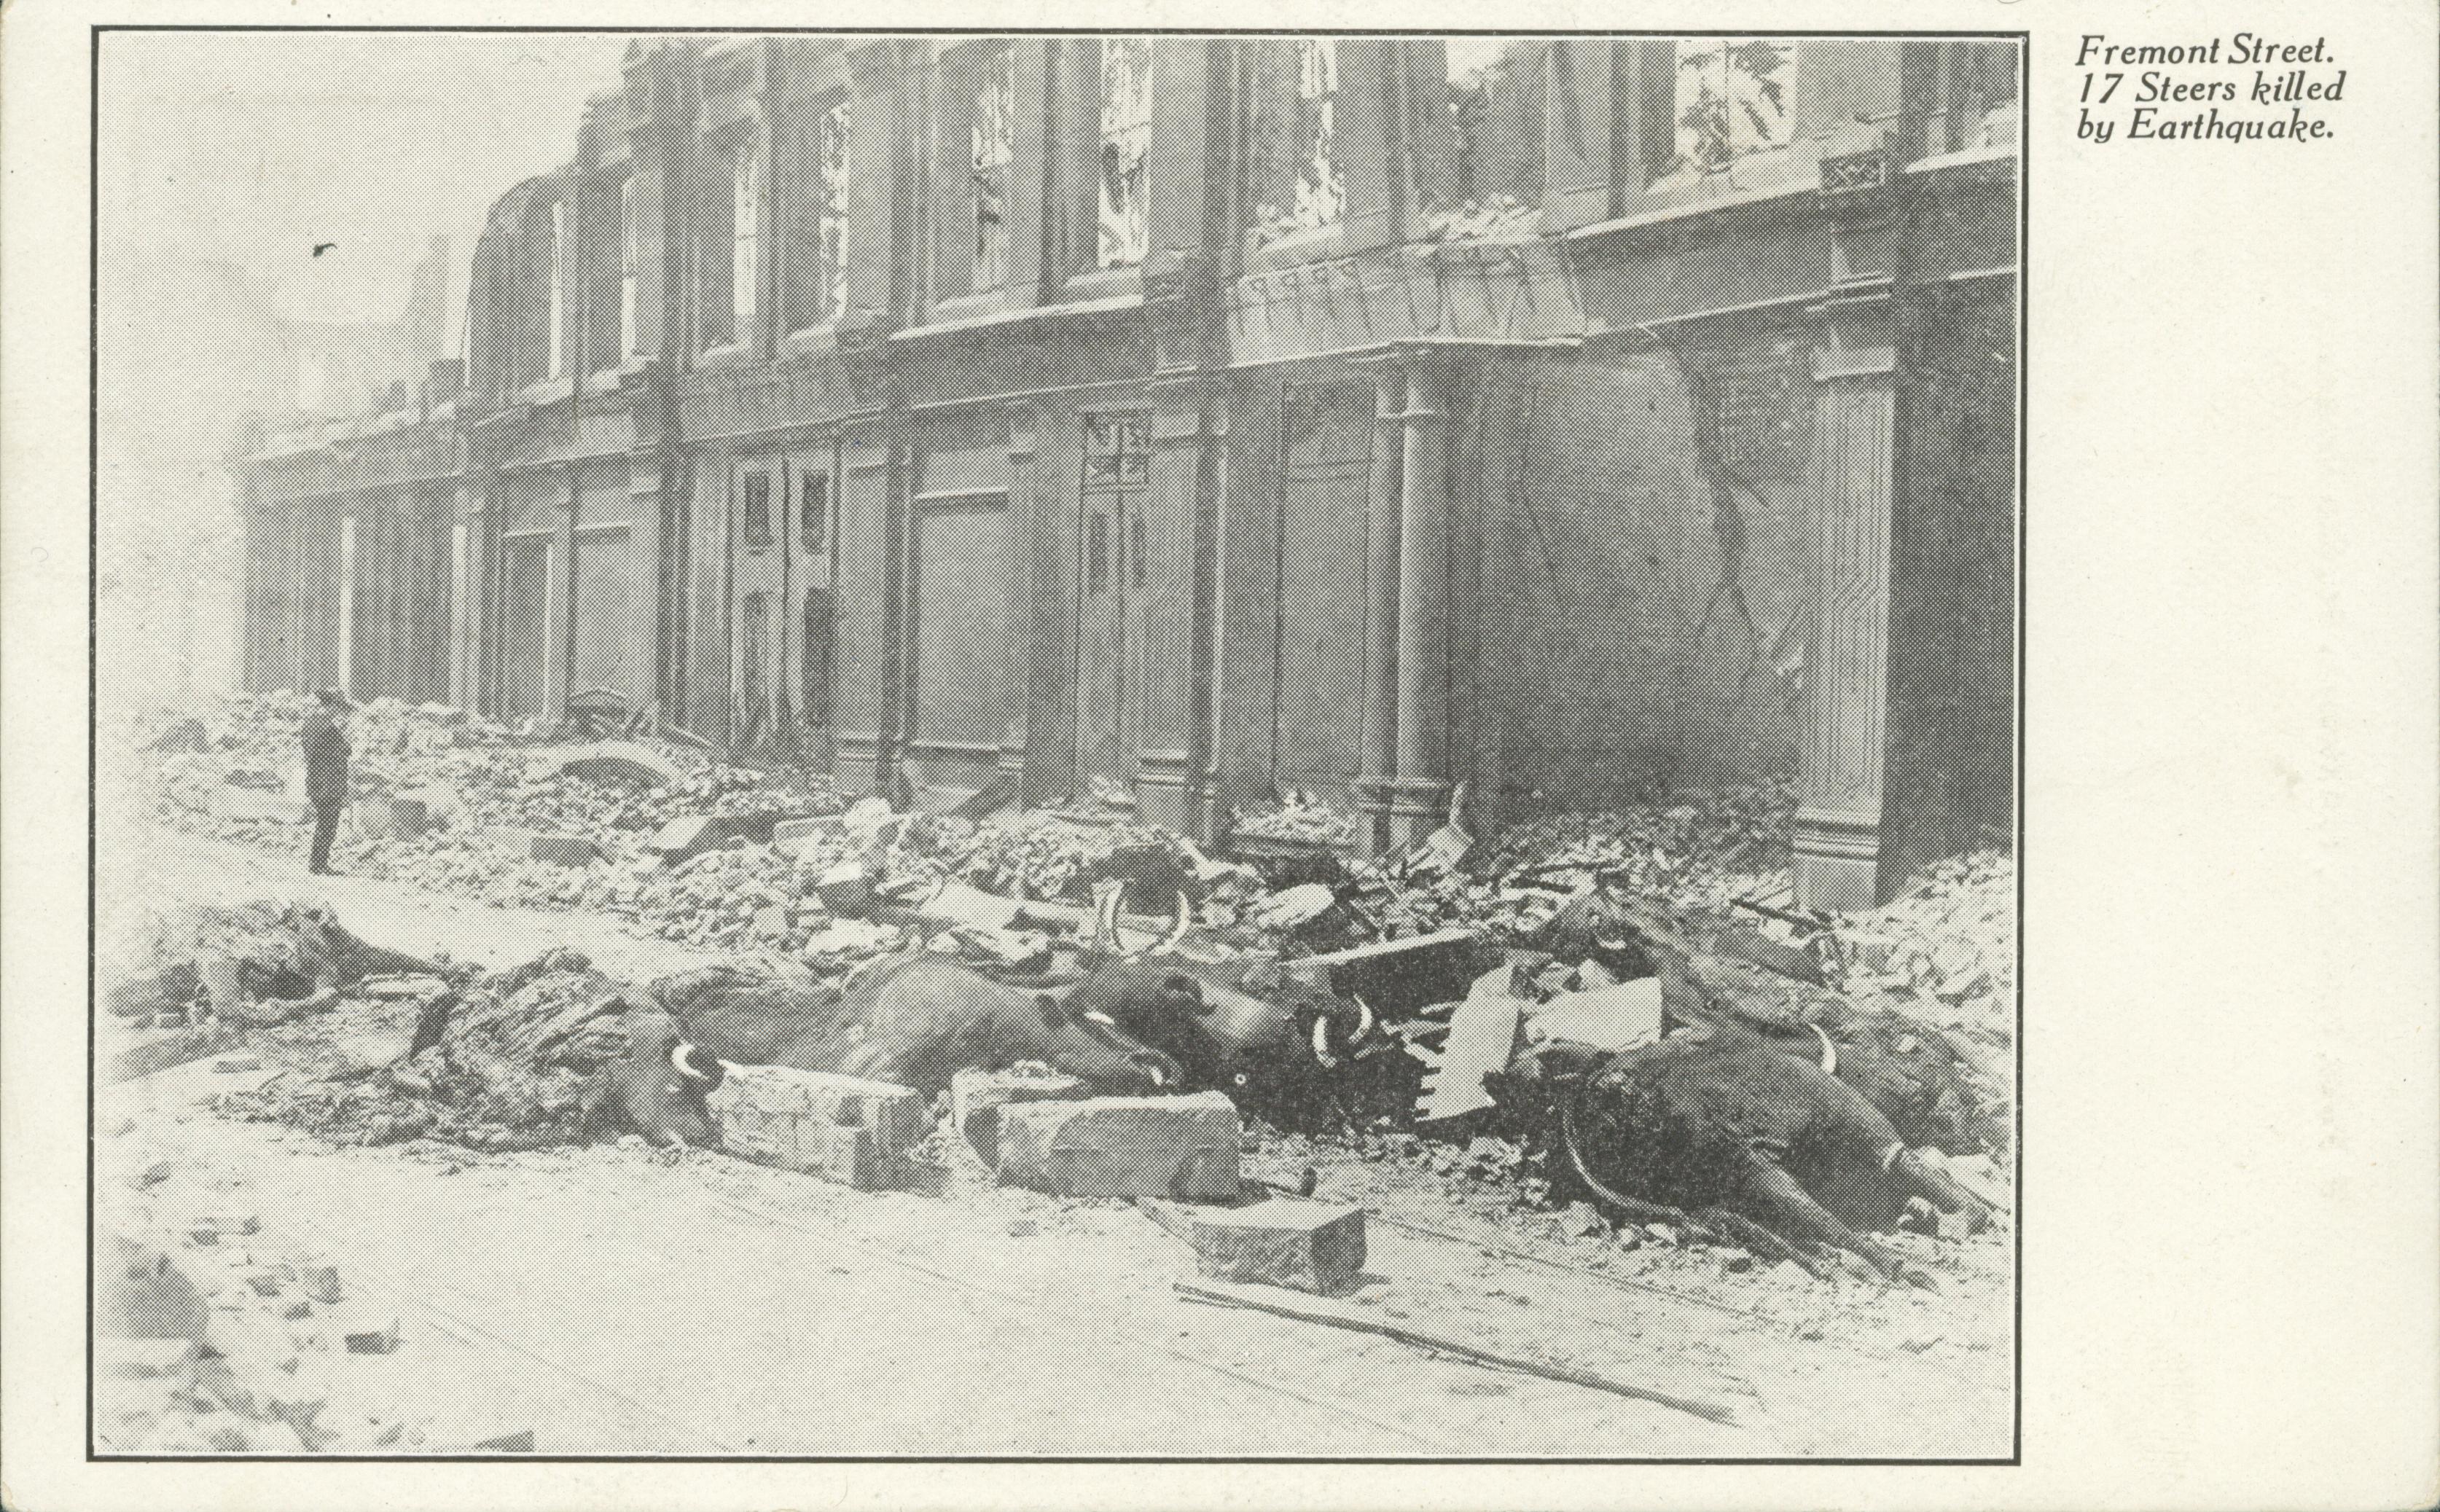 Photo of dead Steer covered in rubble.